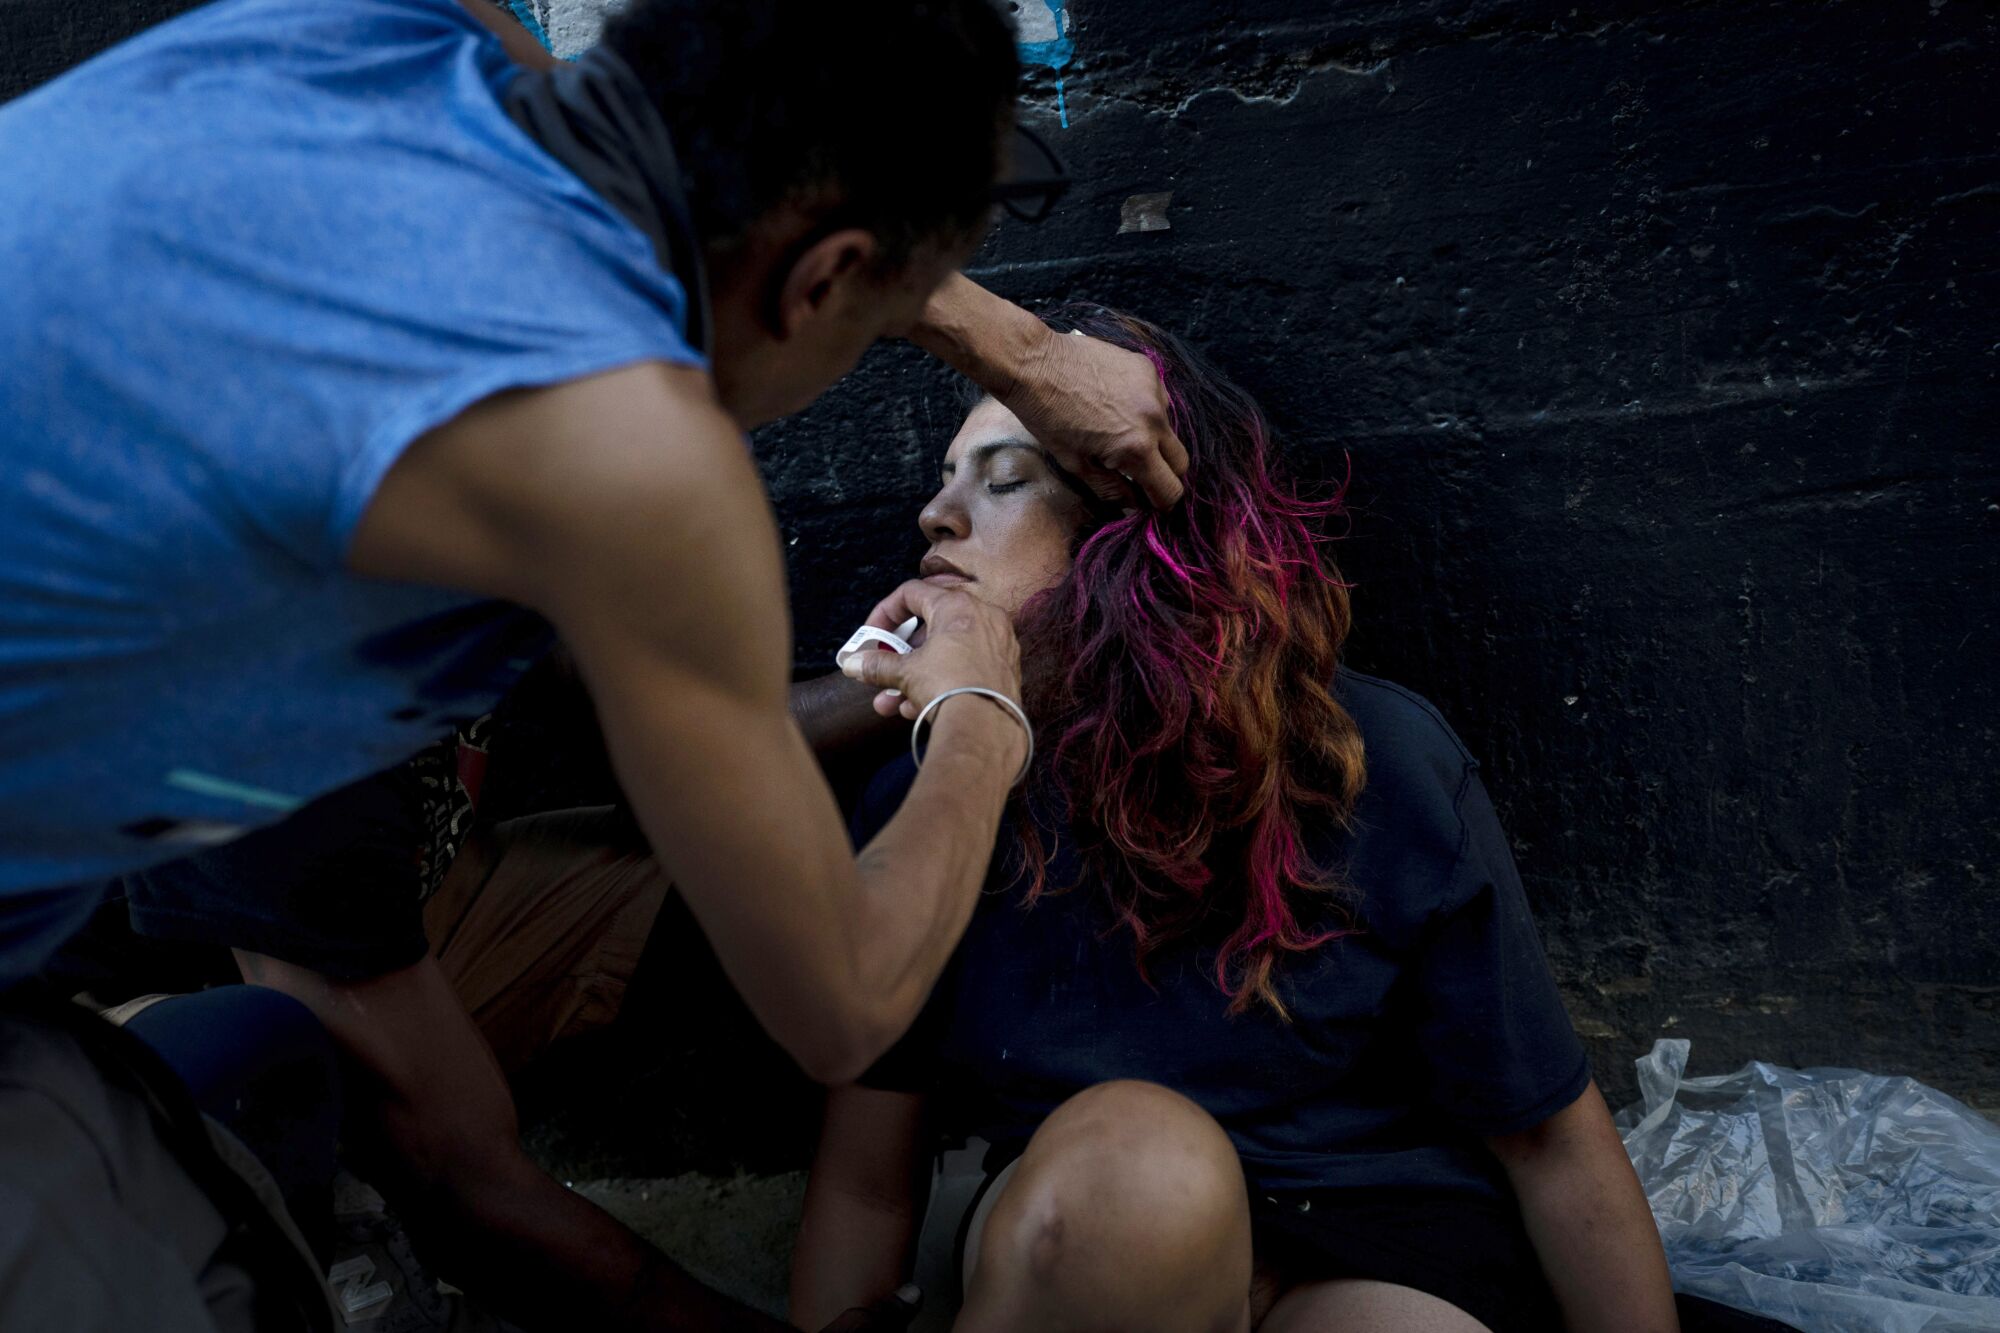 A homeless man injects Narcan nasal spray into the nose of a drug user in Los Angeles.